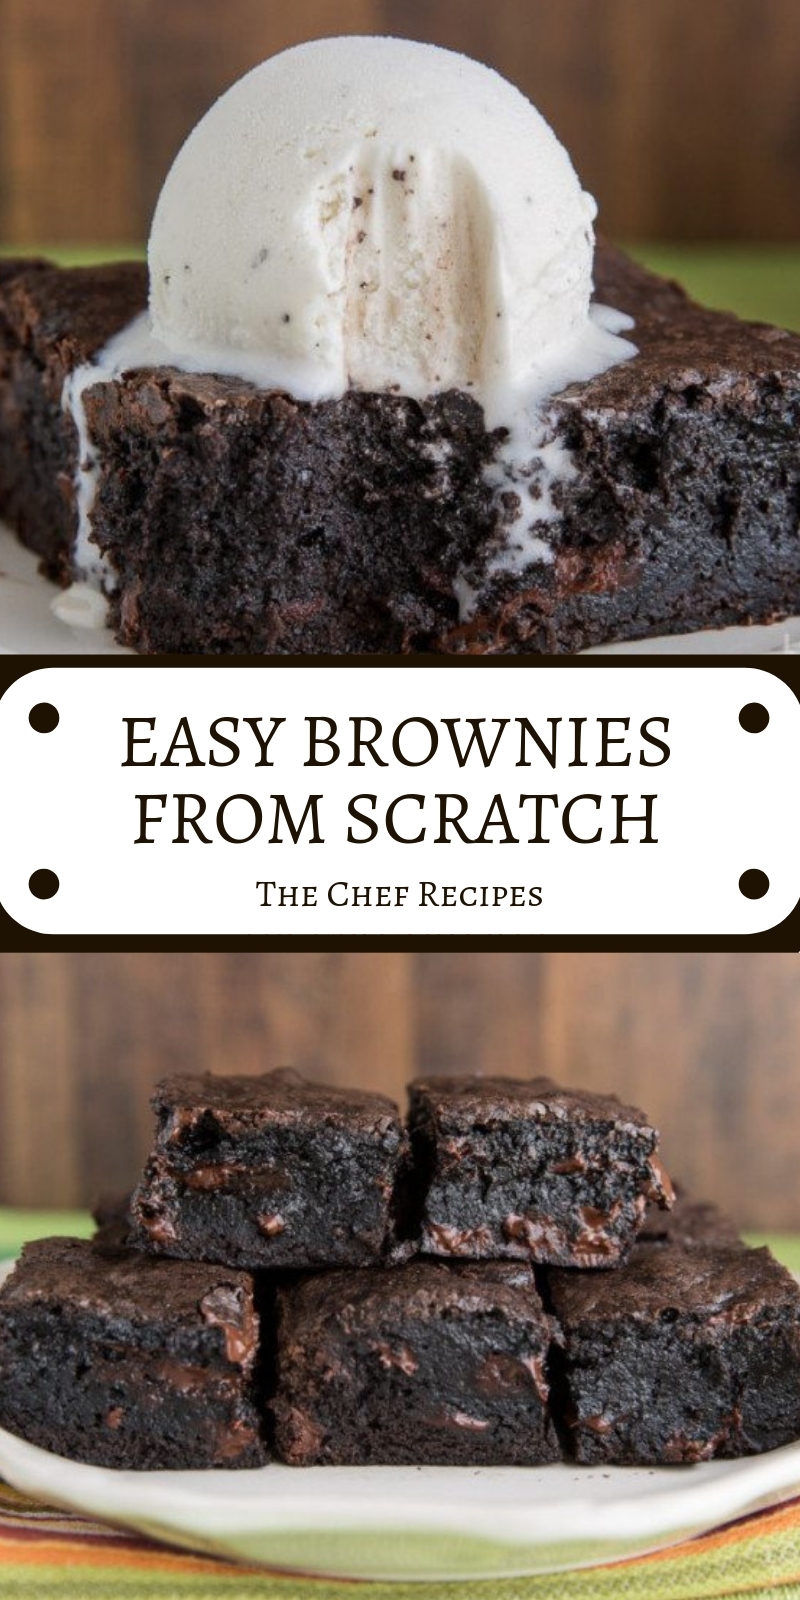 EASY BROWNIES FROM SCRATCH